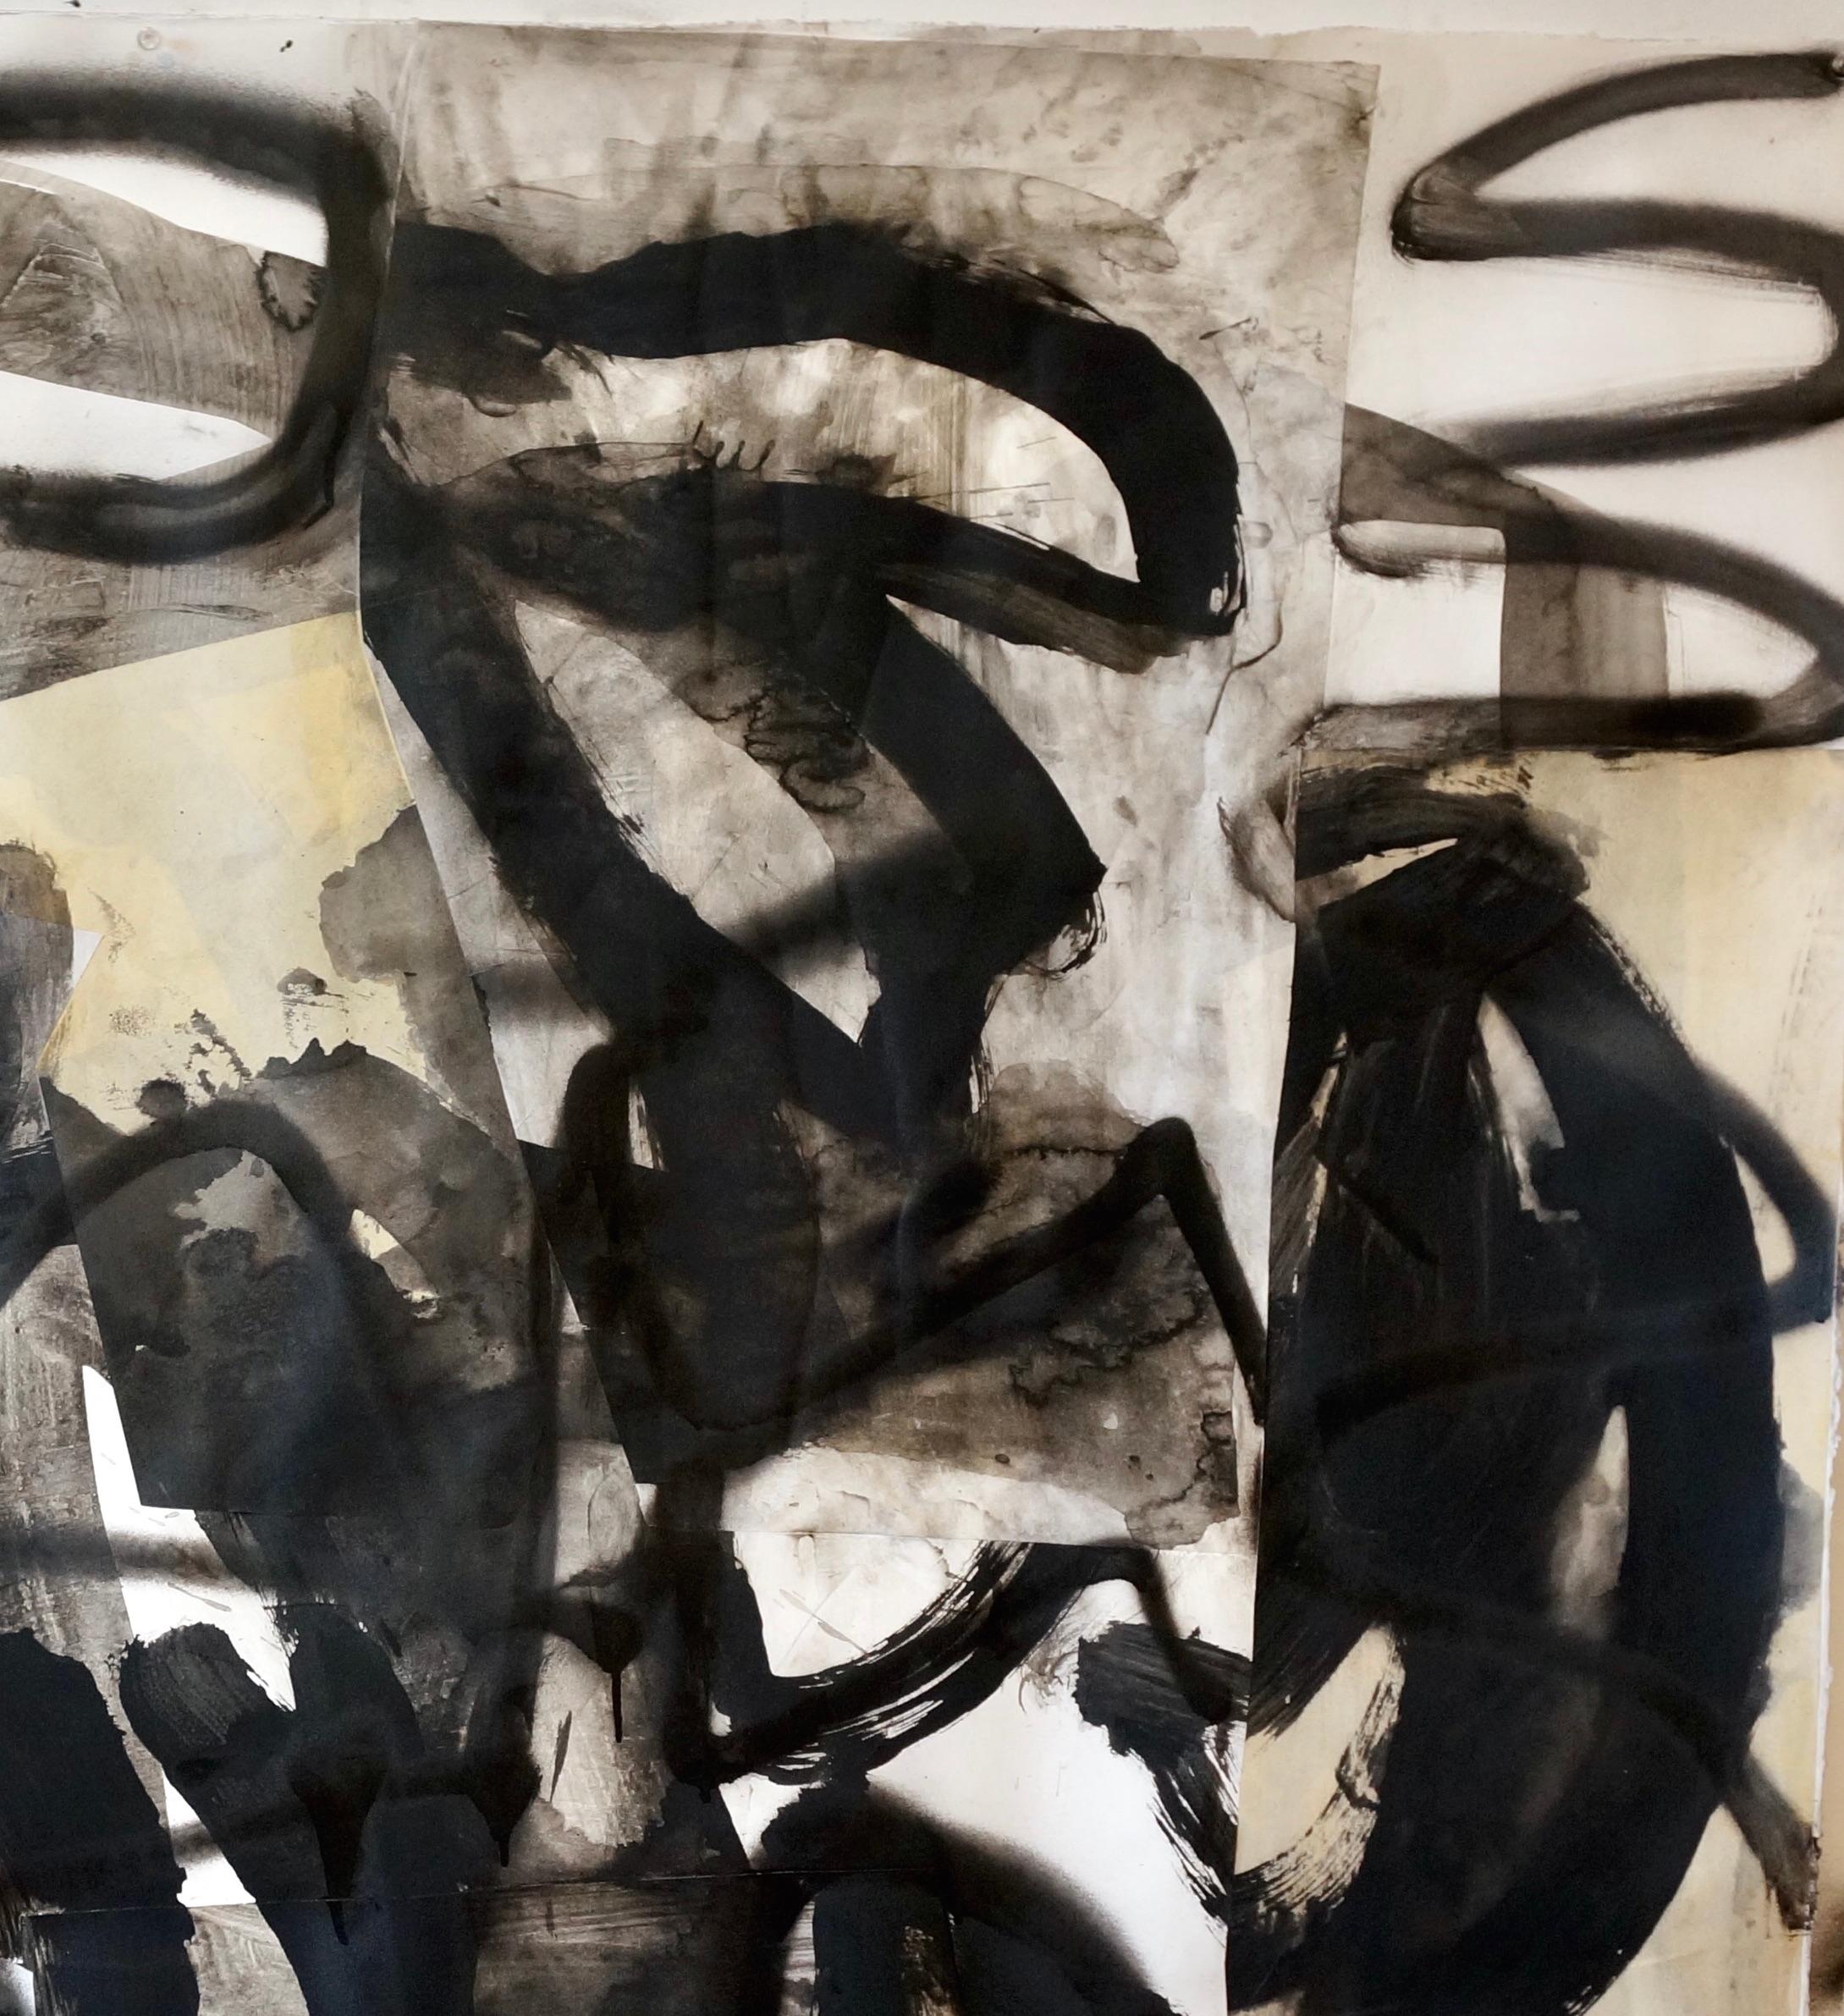 This sizable work on paper is an achromatic mixed media collage. The lack of color serves to emphasize the abstract expressiveness of the mark-making, in addition to the tactility of the layers of material adhering to the composition.

In Alfredo